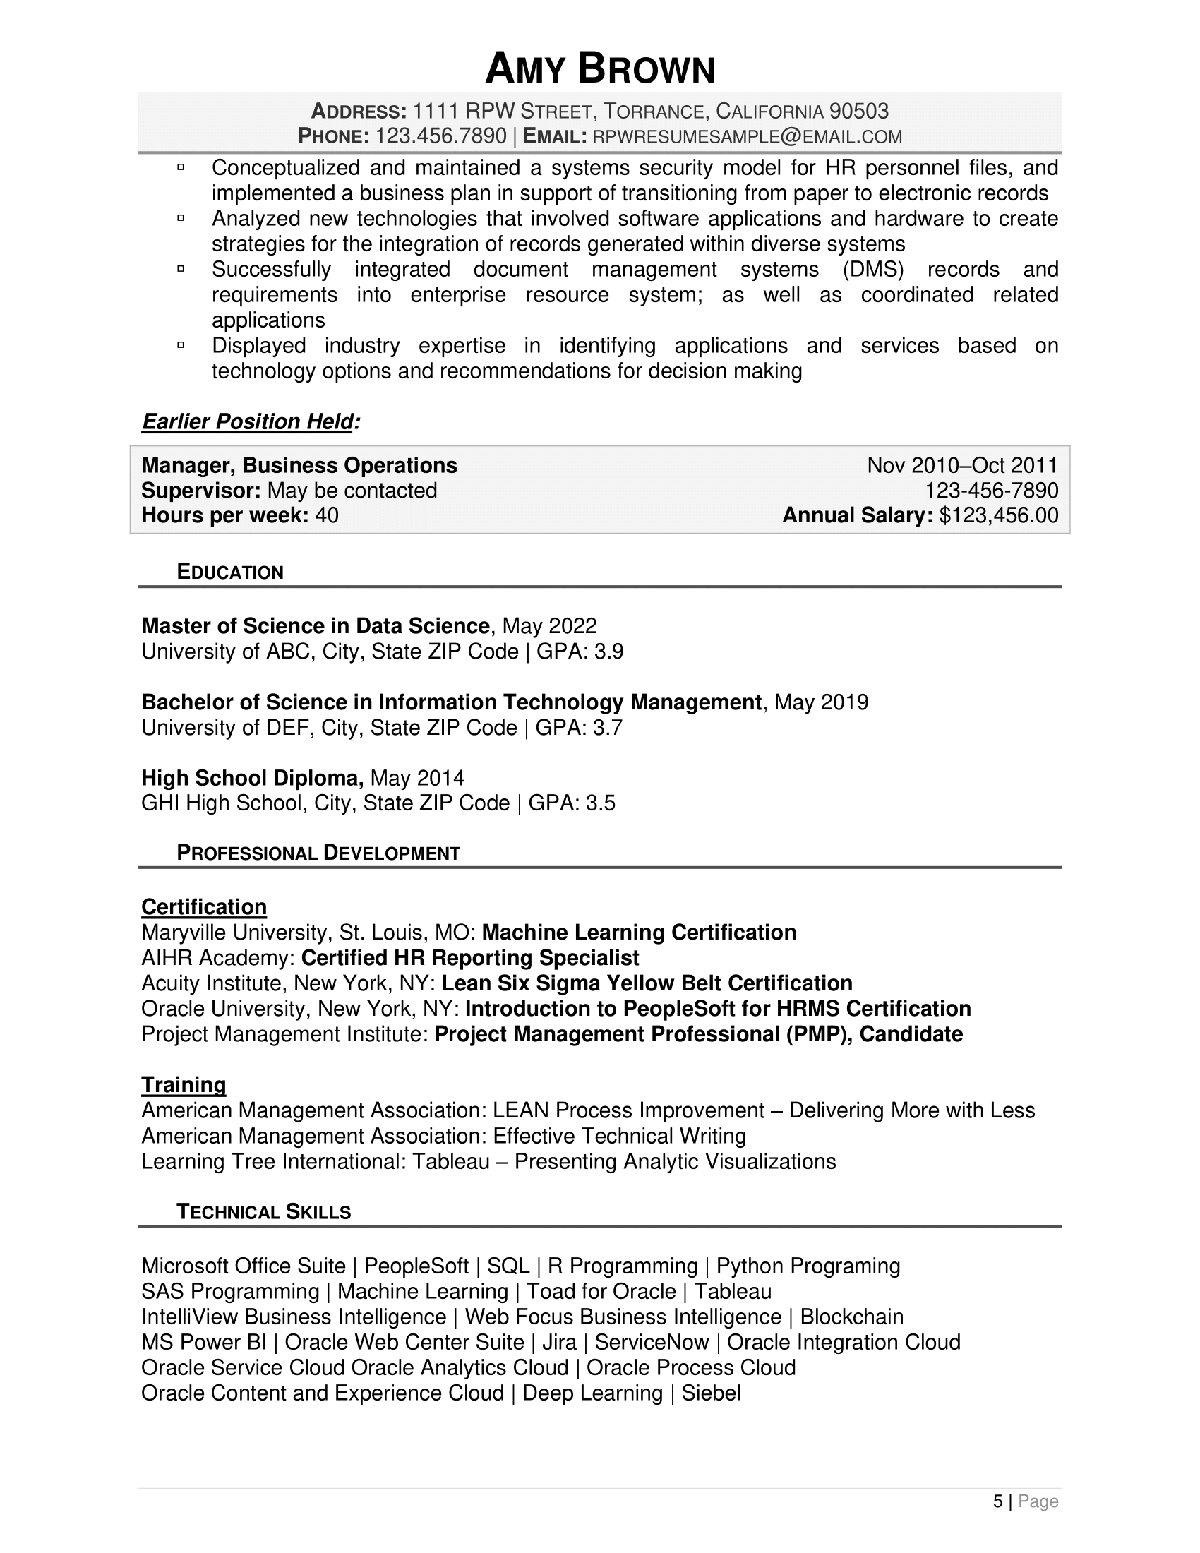 Chief Data Officer Federal Resume Example Page 5